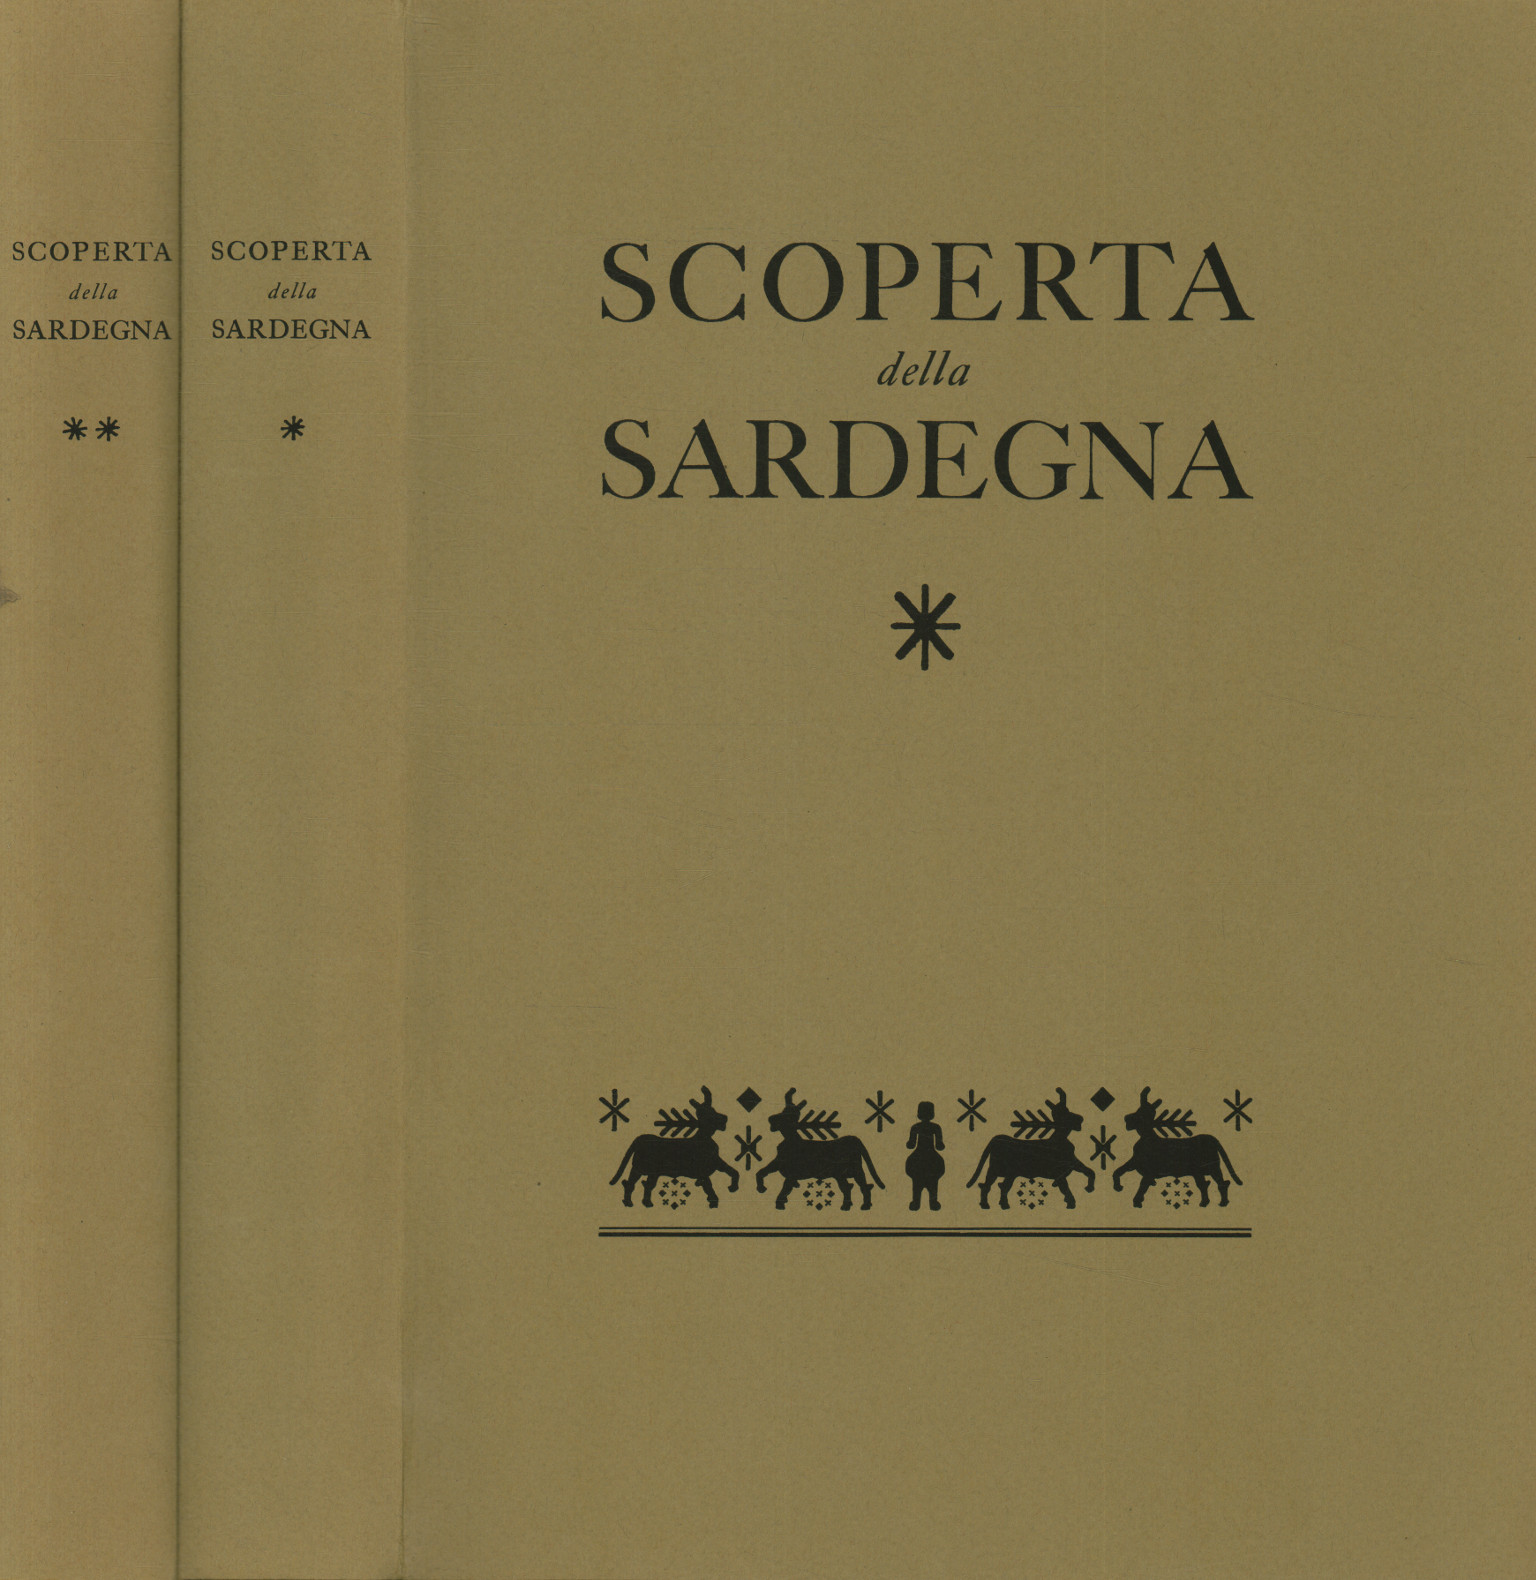 Discovery of Sardinia, Discovery of Sardinia. Anthology of you